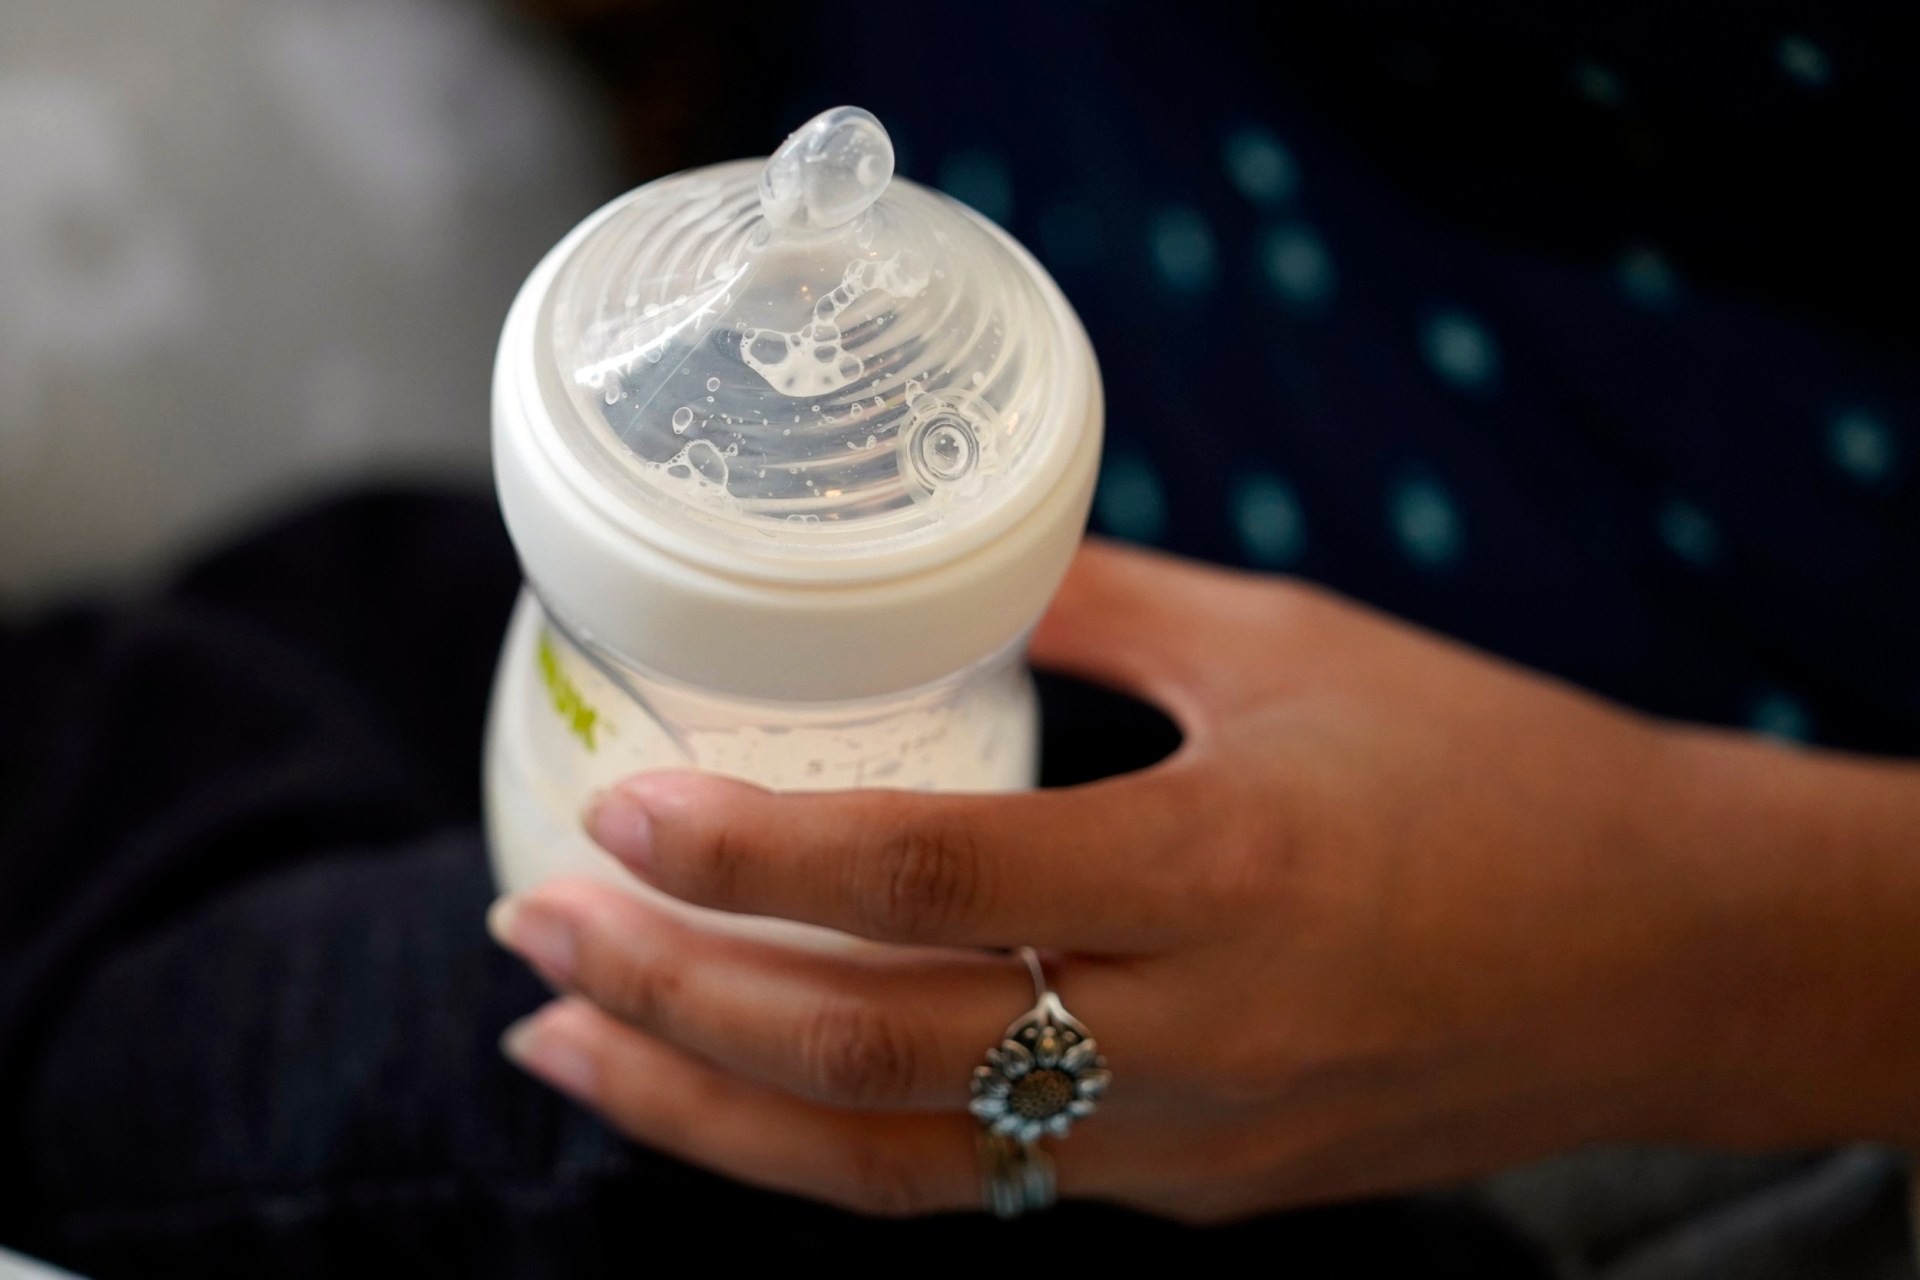 asda to let customers pay for baby formula using vouchers for the first time